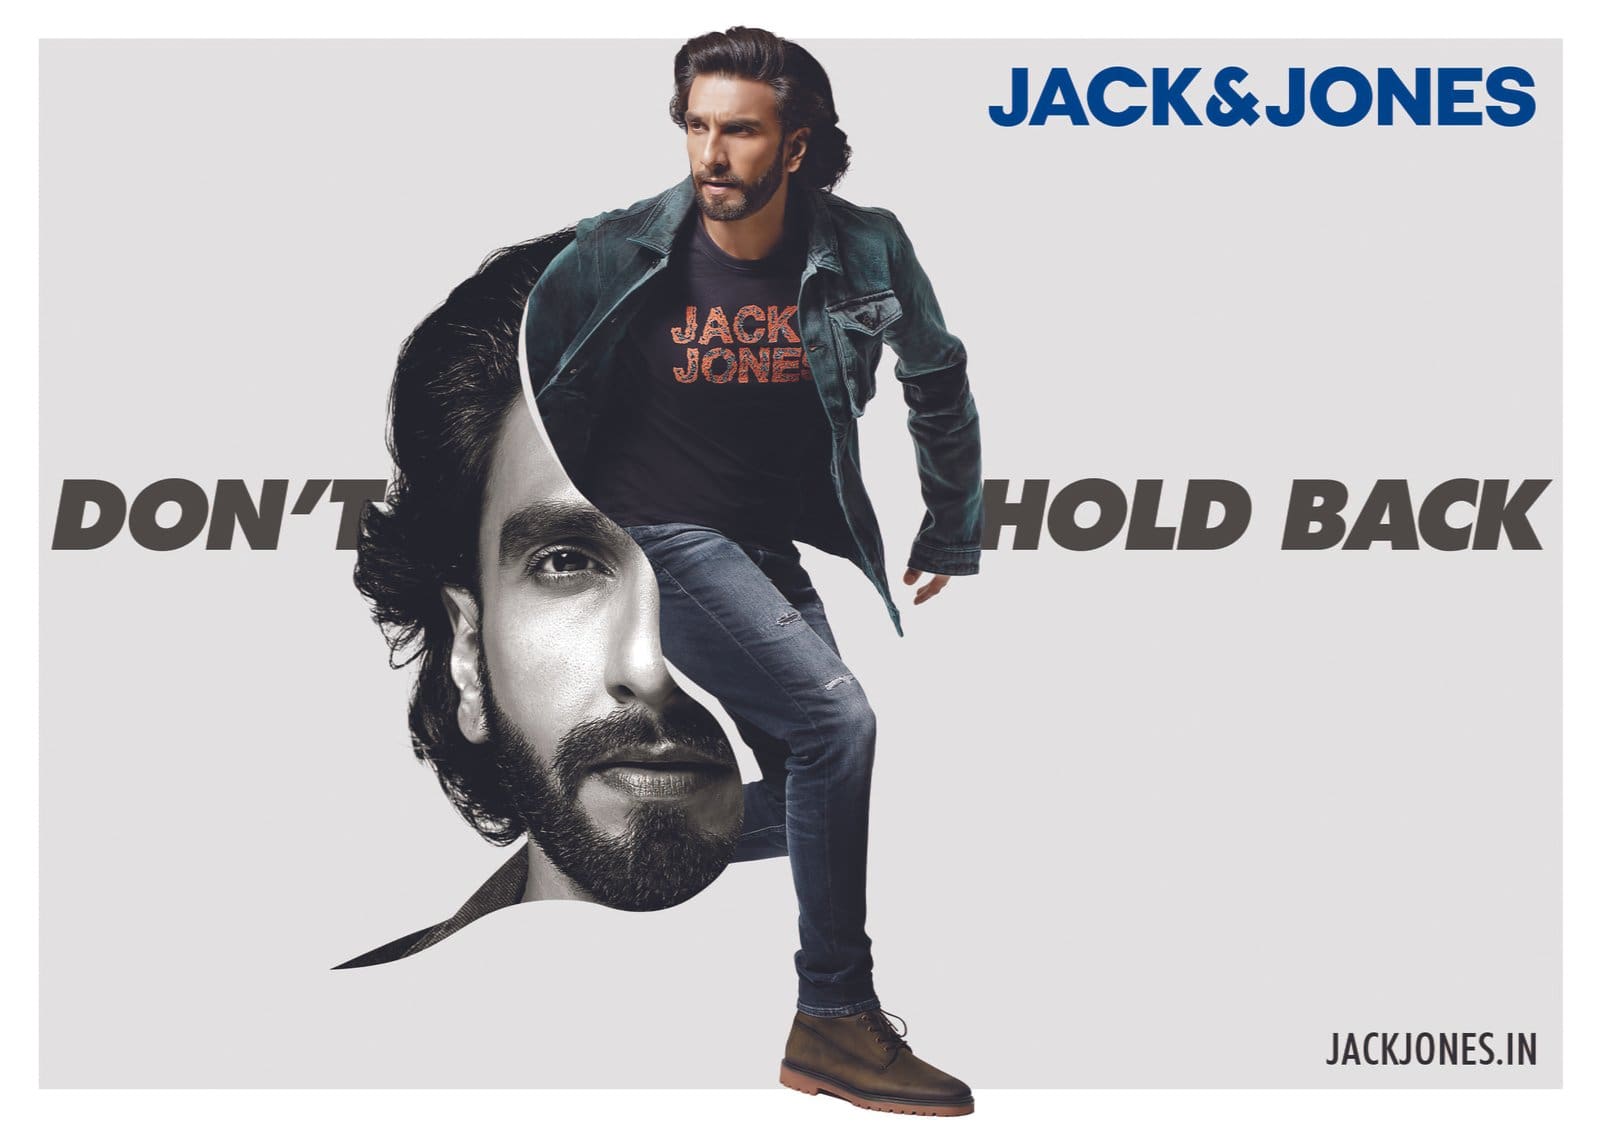 JACK&JONES AND THE SUPERSTAR OF HOLLYWOOD RANVEER SINGH ARE BACK! THEY DON’T HOLD BACK ONE MORE!